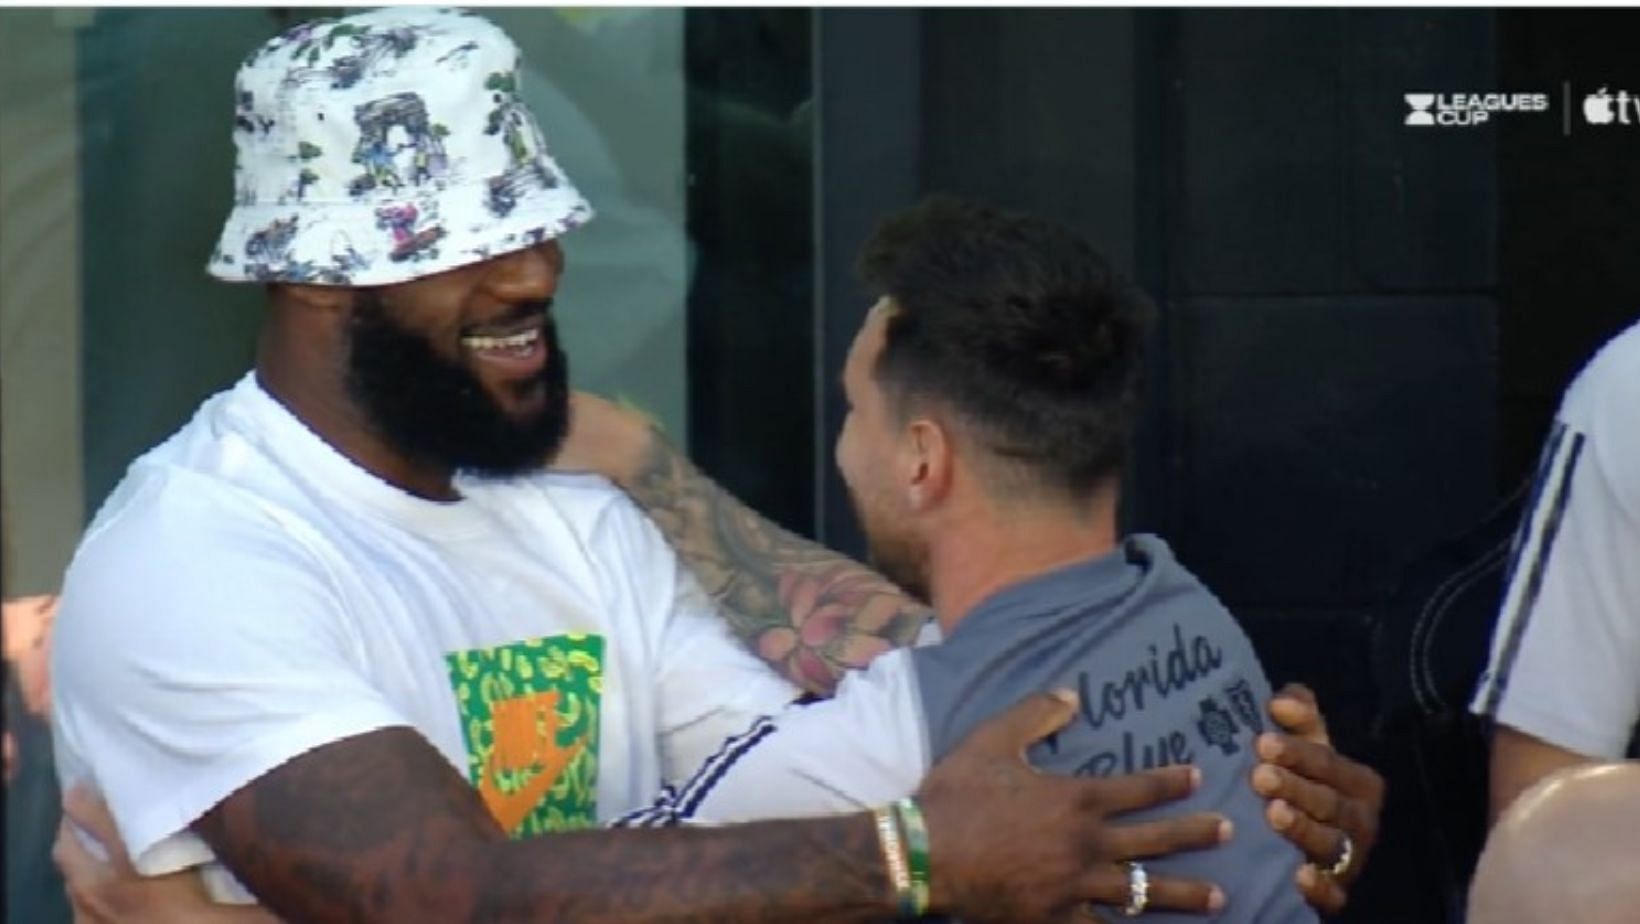 Lionel Messi and LeBron James shared an embrace after the Inter Miami versus Cruz Azul game in the MLS.